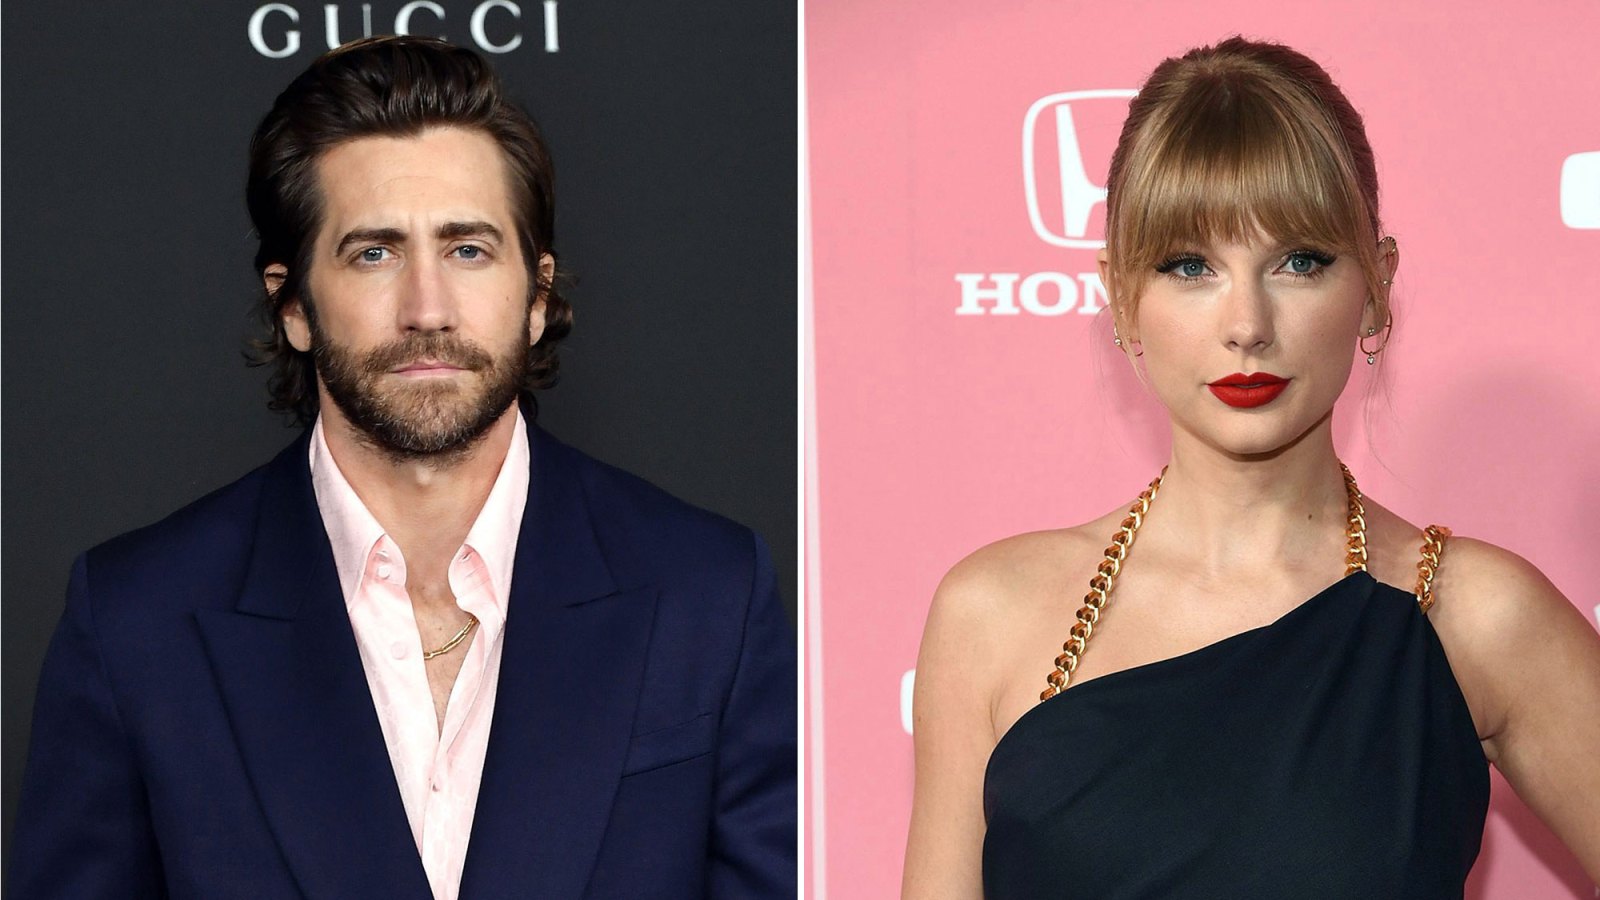 Jake Gyllenhaal’s Secret Cat Calls Out Cyber Bullying Amid Taylor Swift Red Drama